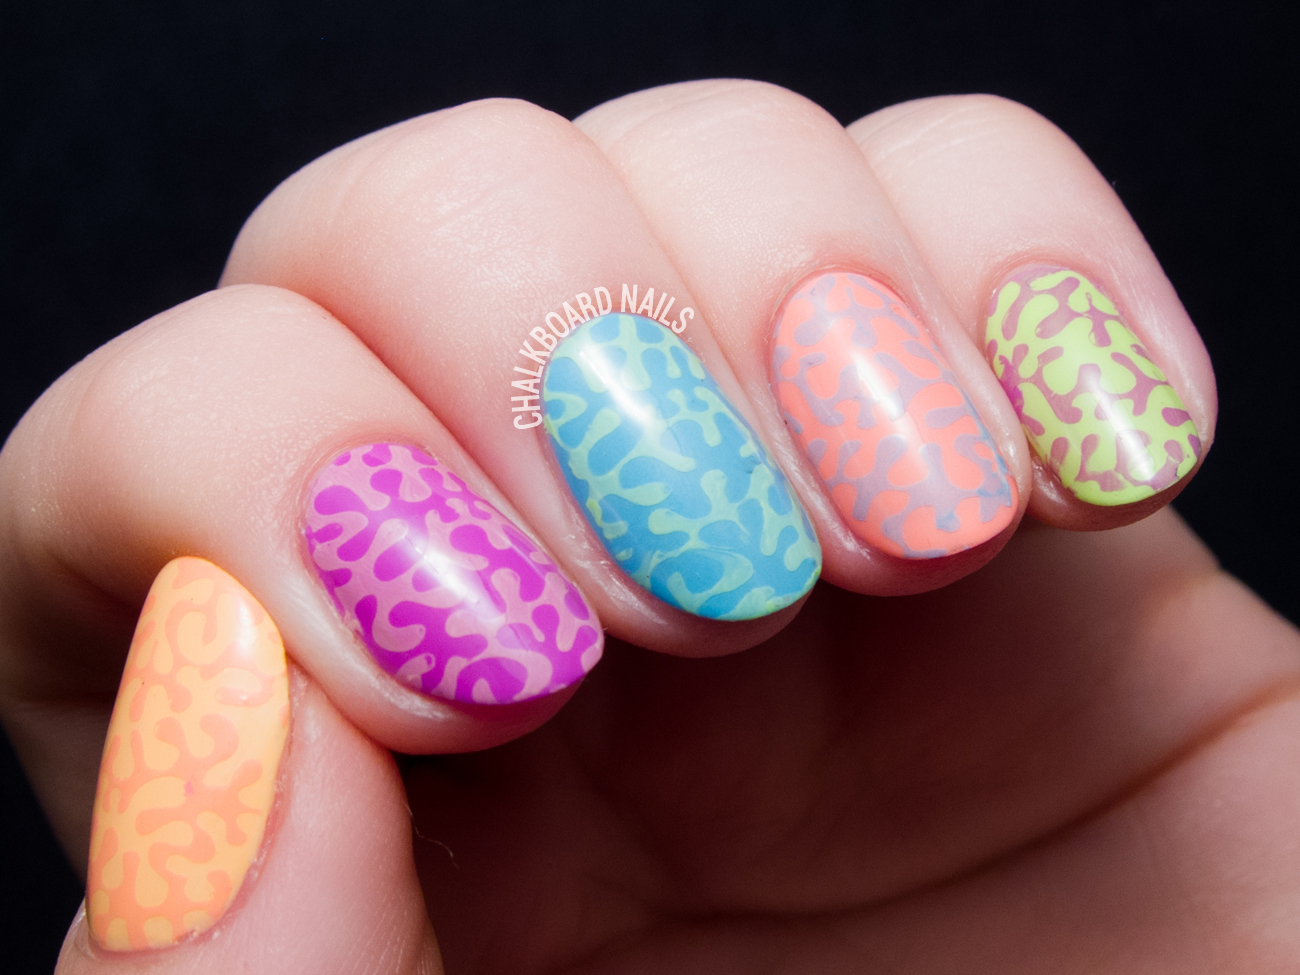 Neon mix-up stamping nail art by @chalkboardnails